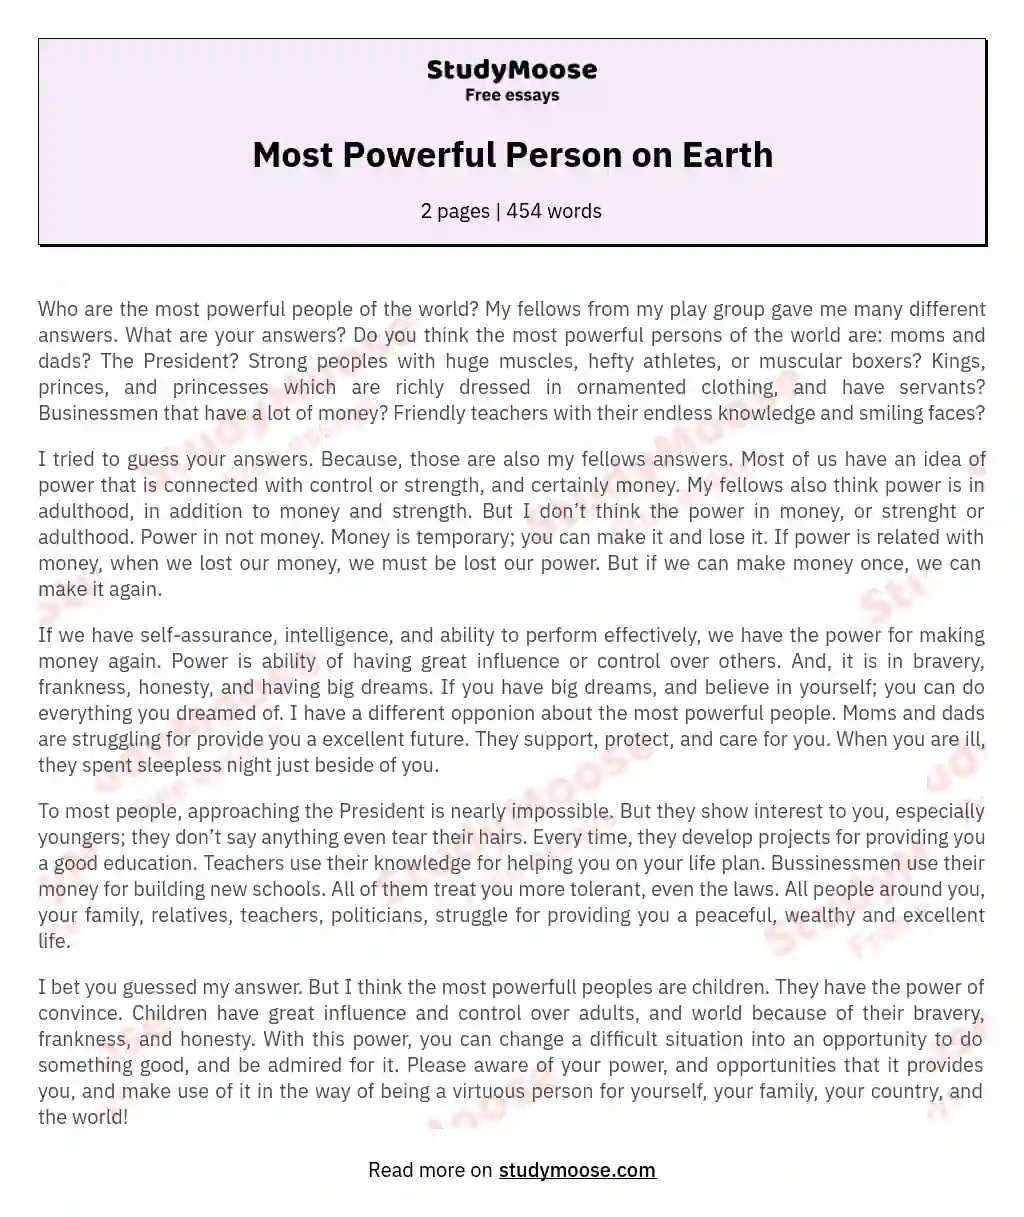 Most Powerful Person on Earth essay